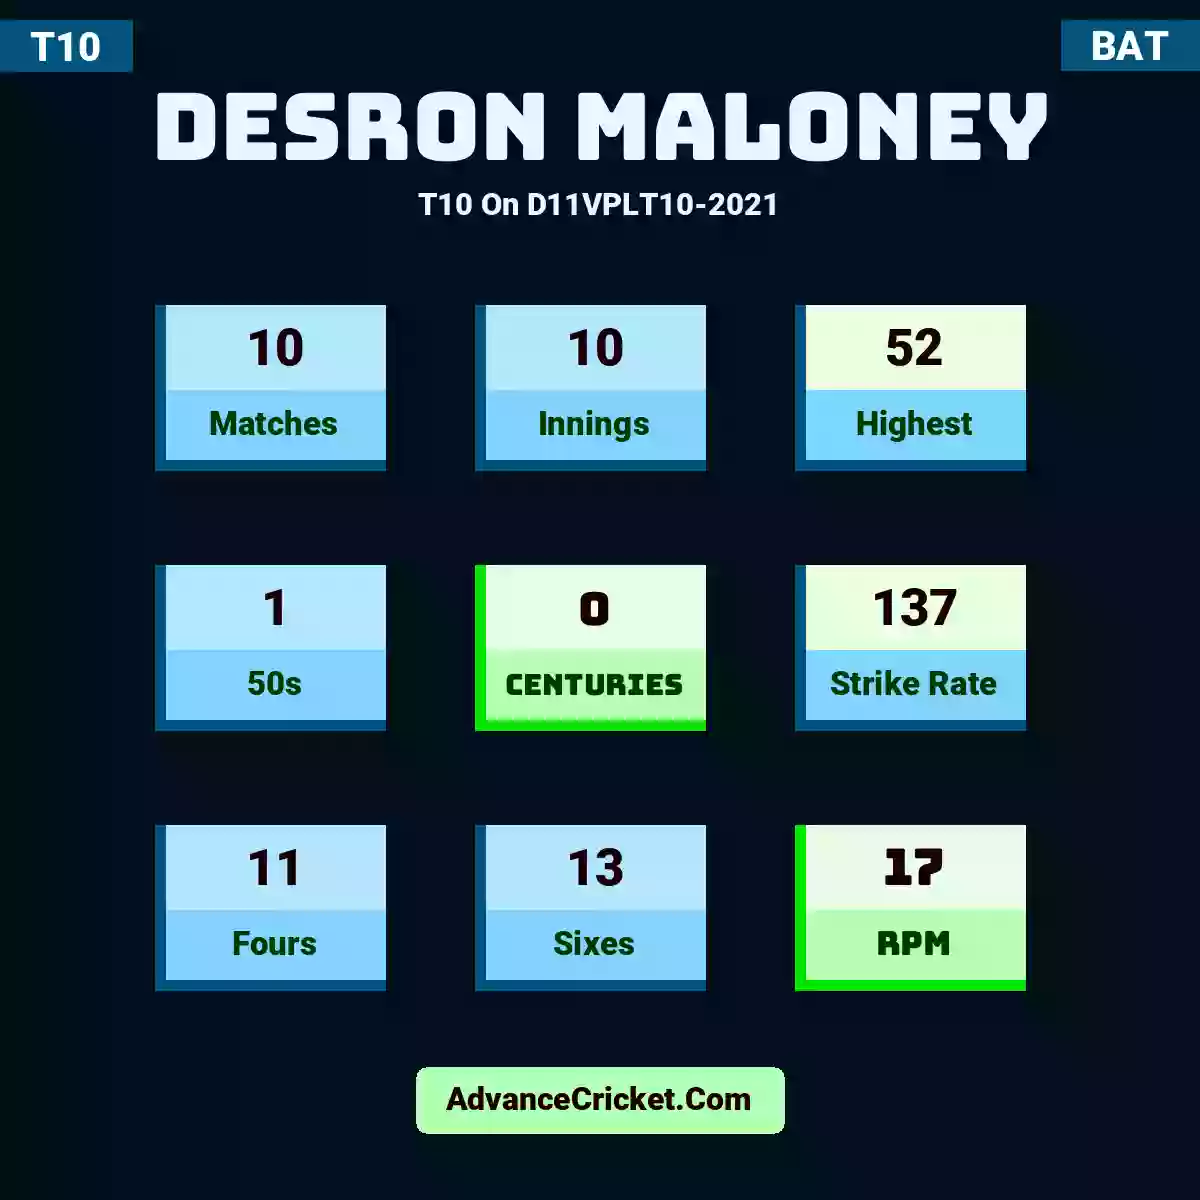 Desron Maloney T10  On D11VPLT10-2021, Desron Maloney played 10 matches, scored 52 runs as highest, 1 half-centuries, and 0 centuries, with a strike rate of 137. D.Maloney hit 11 fours and 13 sixes, with an RPM of 17.